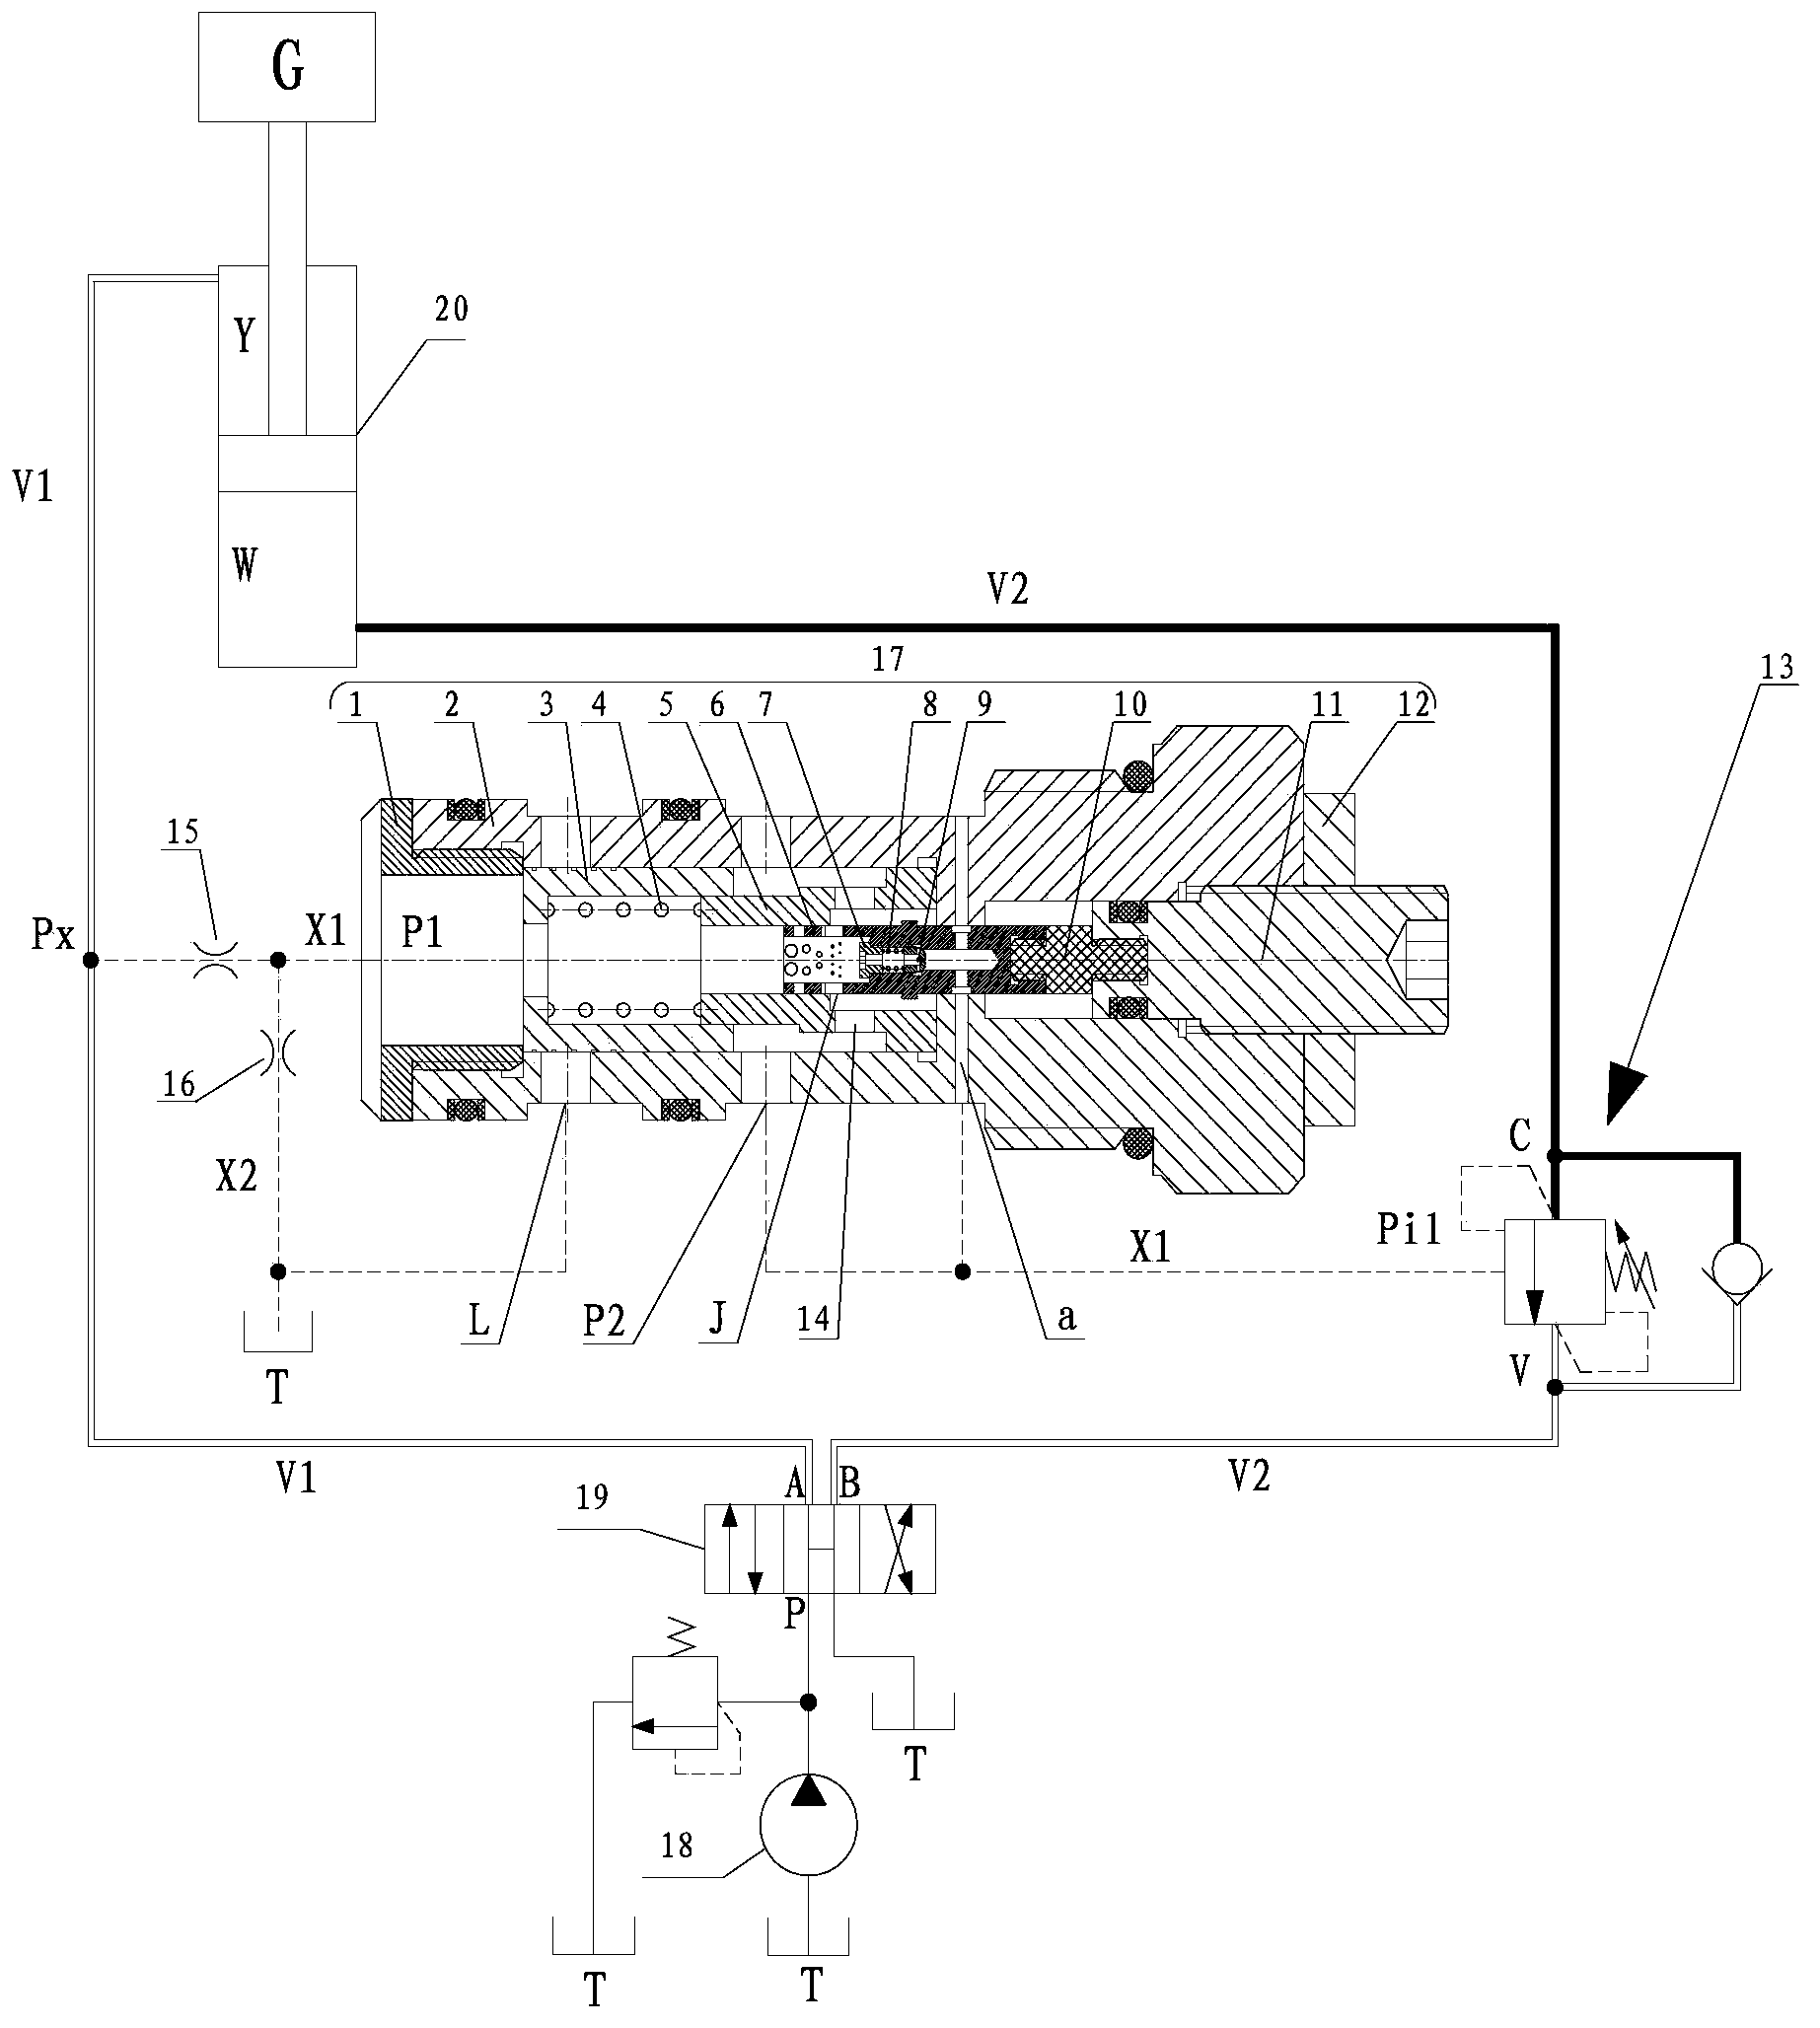 Load control balance valve and load control hydraulic system